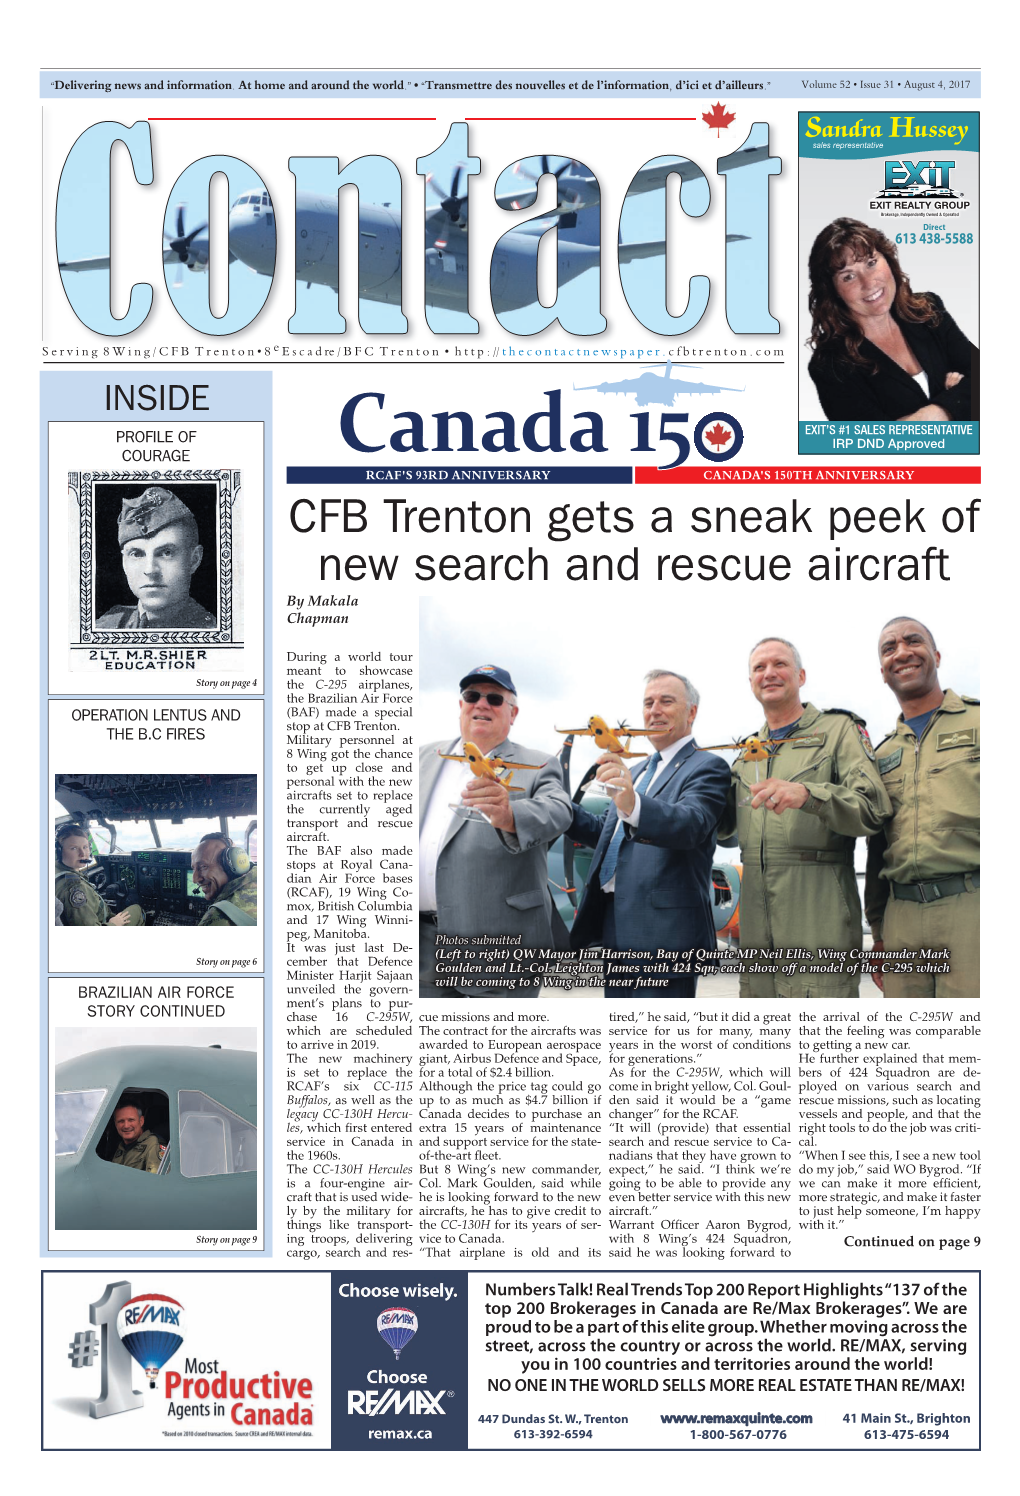 Canada 15 RCAF's 93RD ANNIVERSARY CANADA's 150TH ANNIVERSARY CFB Trenton Gets a Sneak Peek of New Search and Rescue Aircraft by Makala Chapman